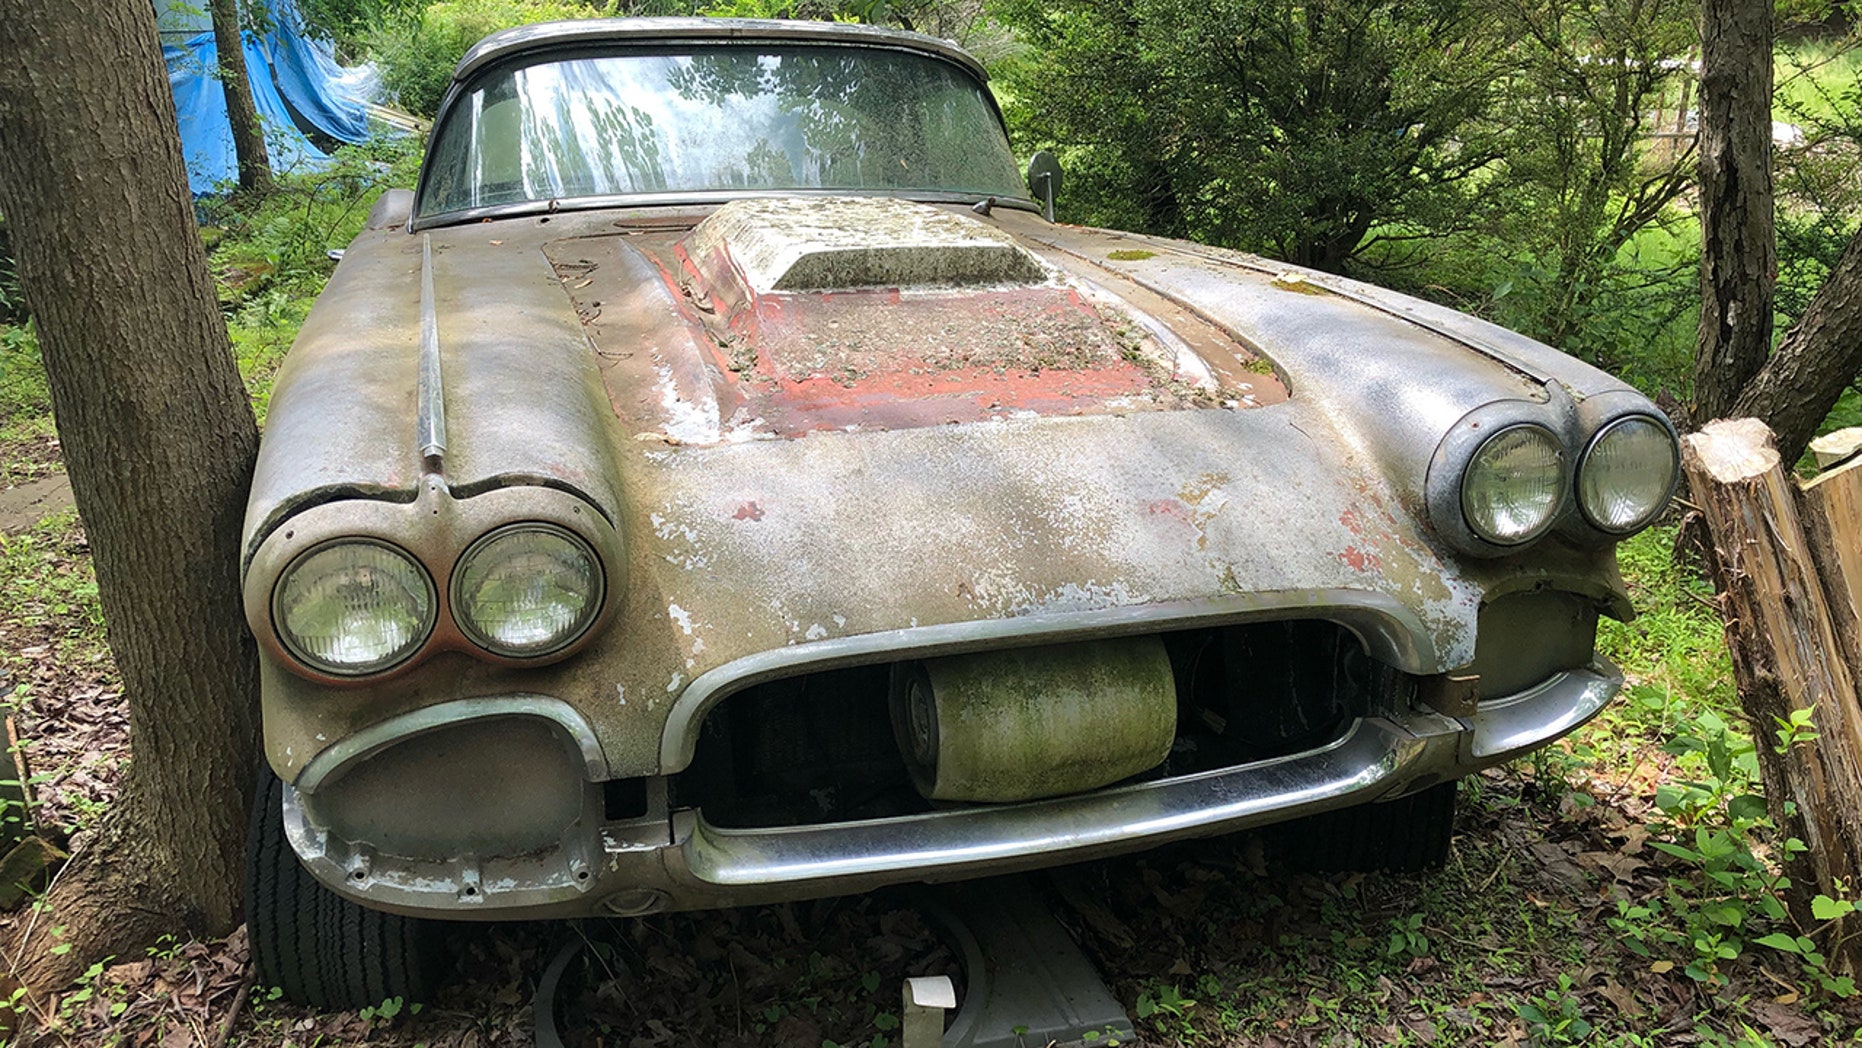 Mosscovered 1961 Chevy Corvette on Craigslist is oneofa car.photo